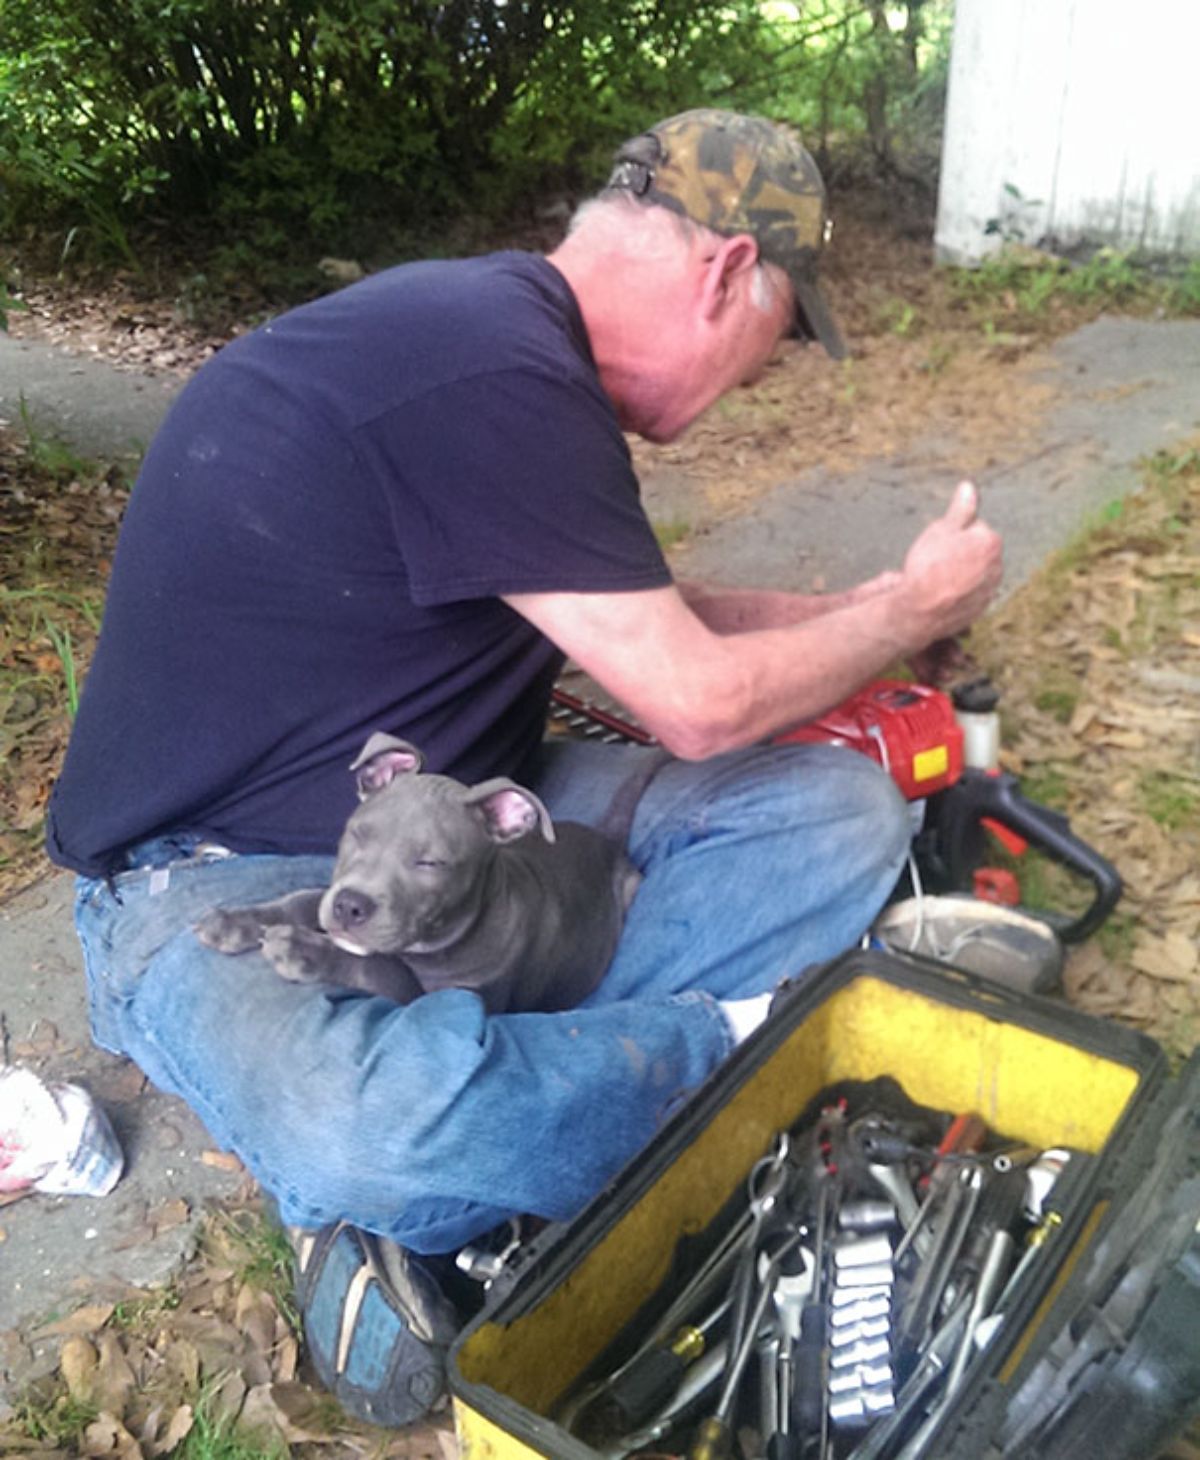 old man fixing something with a grey puppy sleeping on his lap